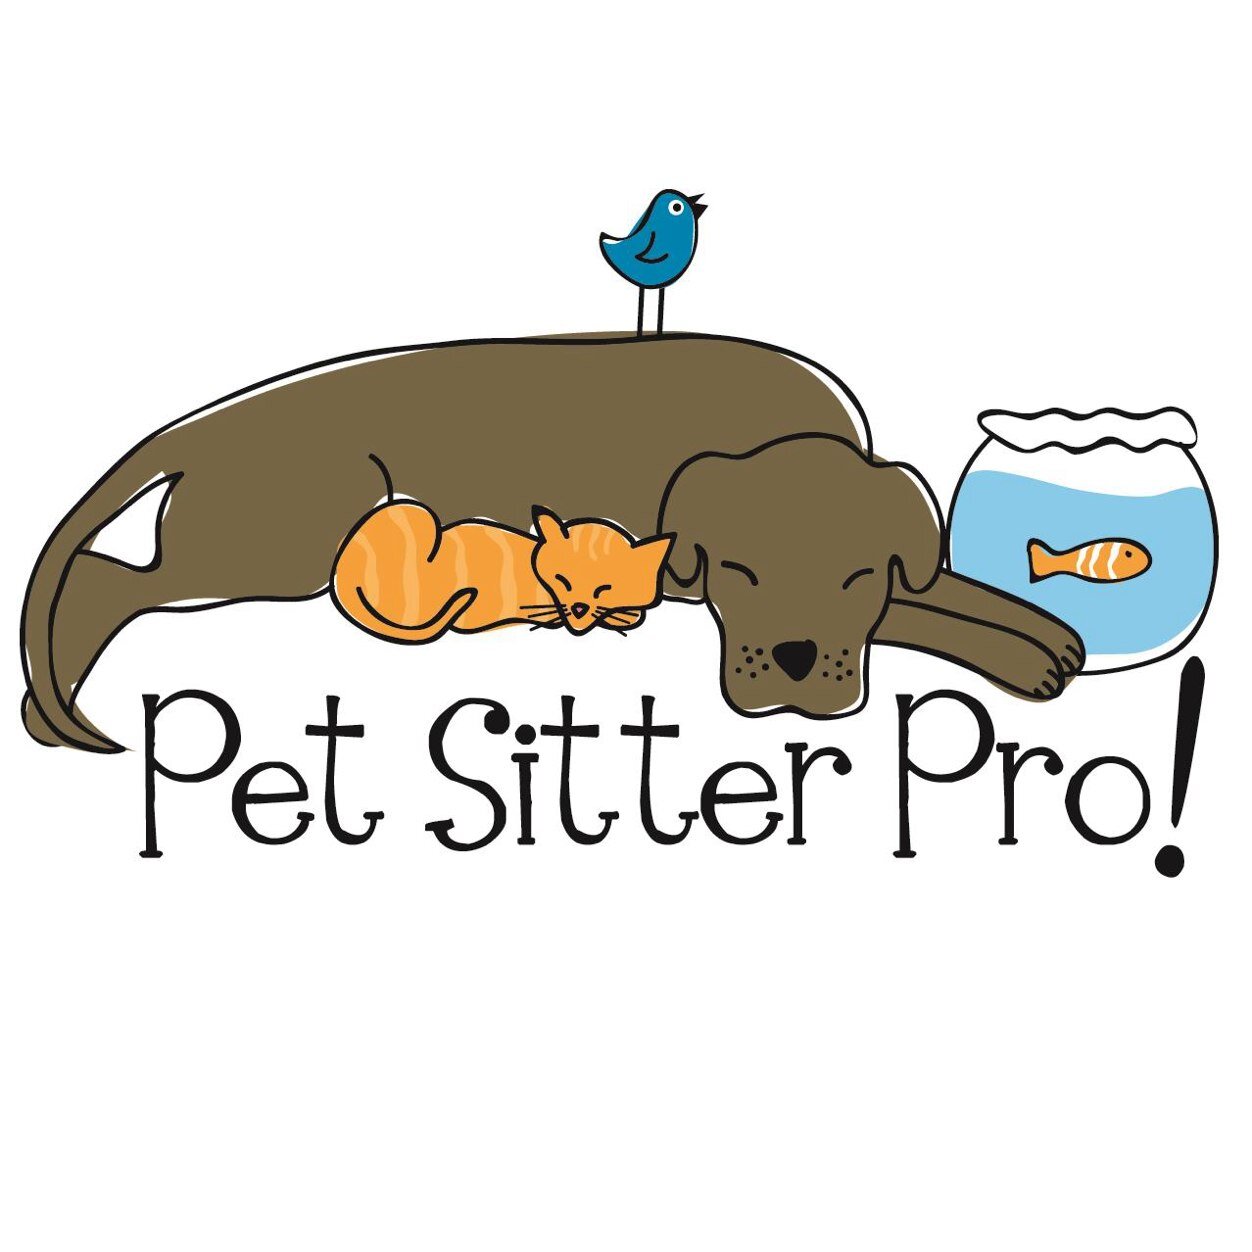 Pet Sitter Pro! offers pet sitting, overnights, pet transport, and dog walking for vacationers and busy professionals in Gilbert, AZ.